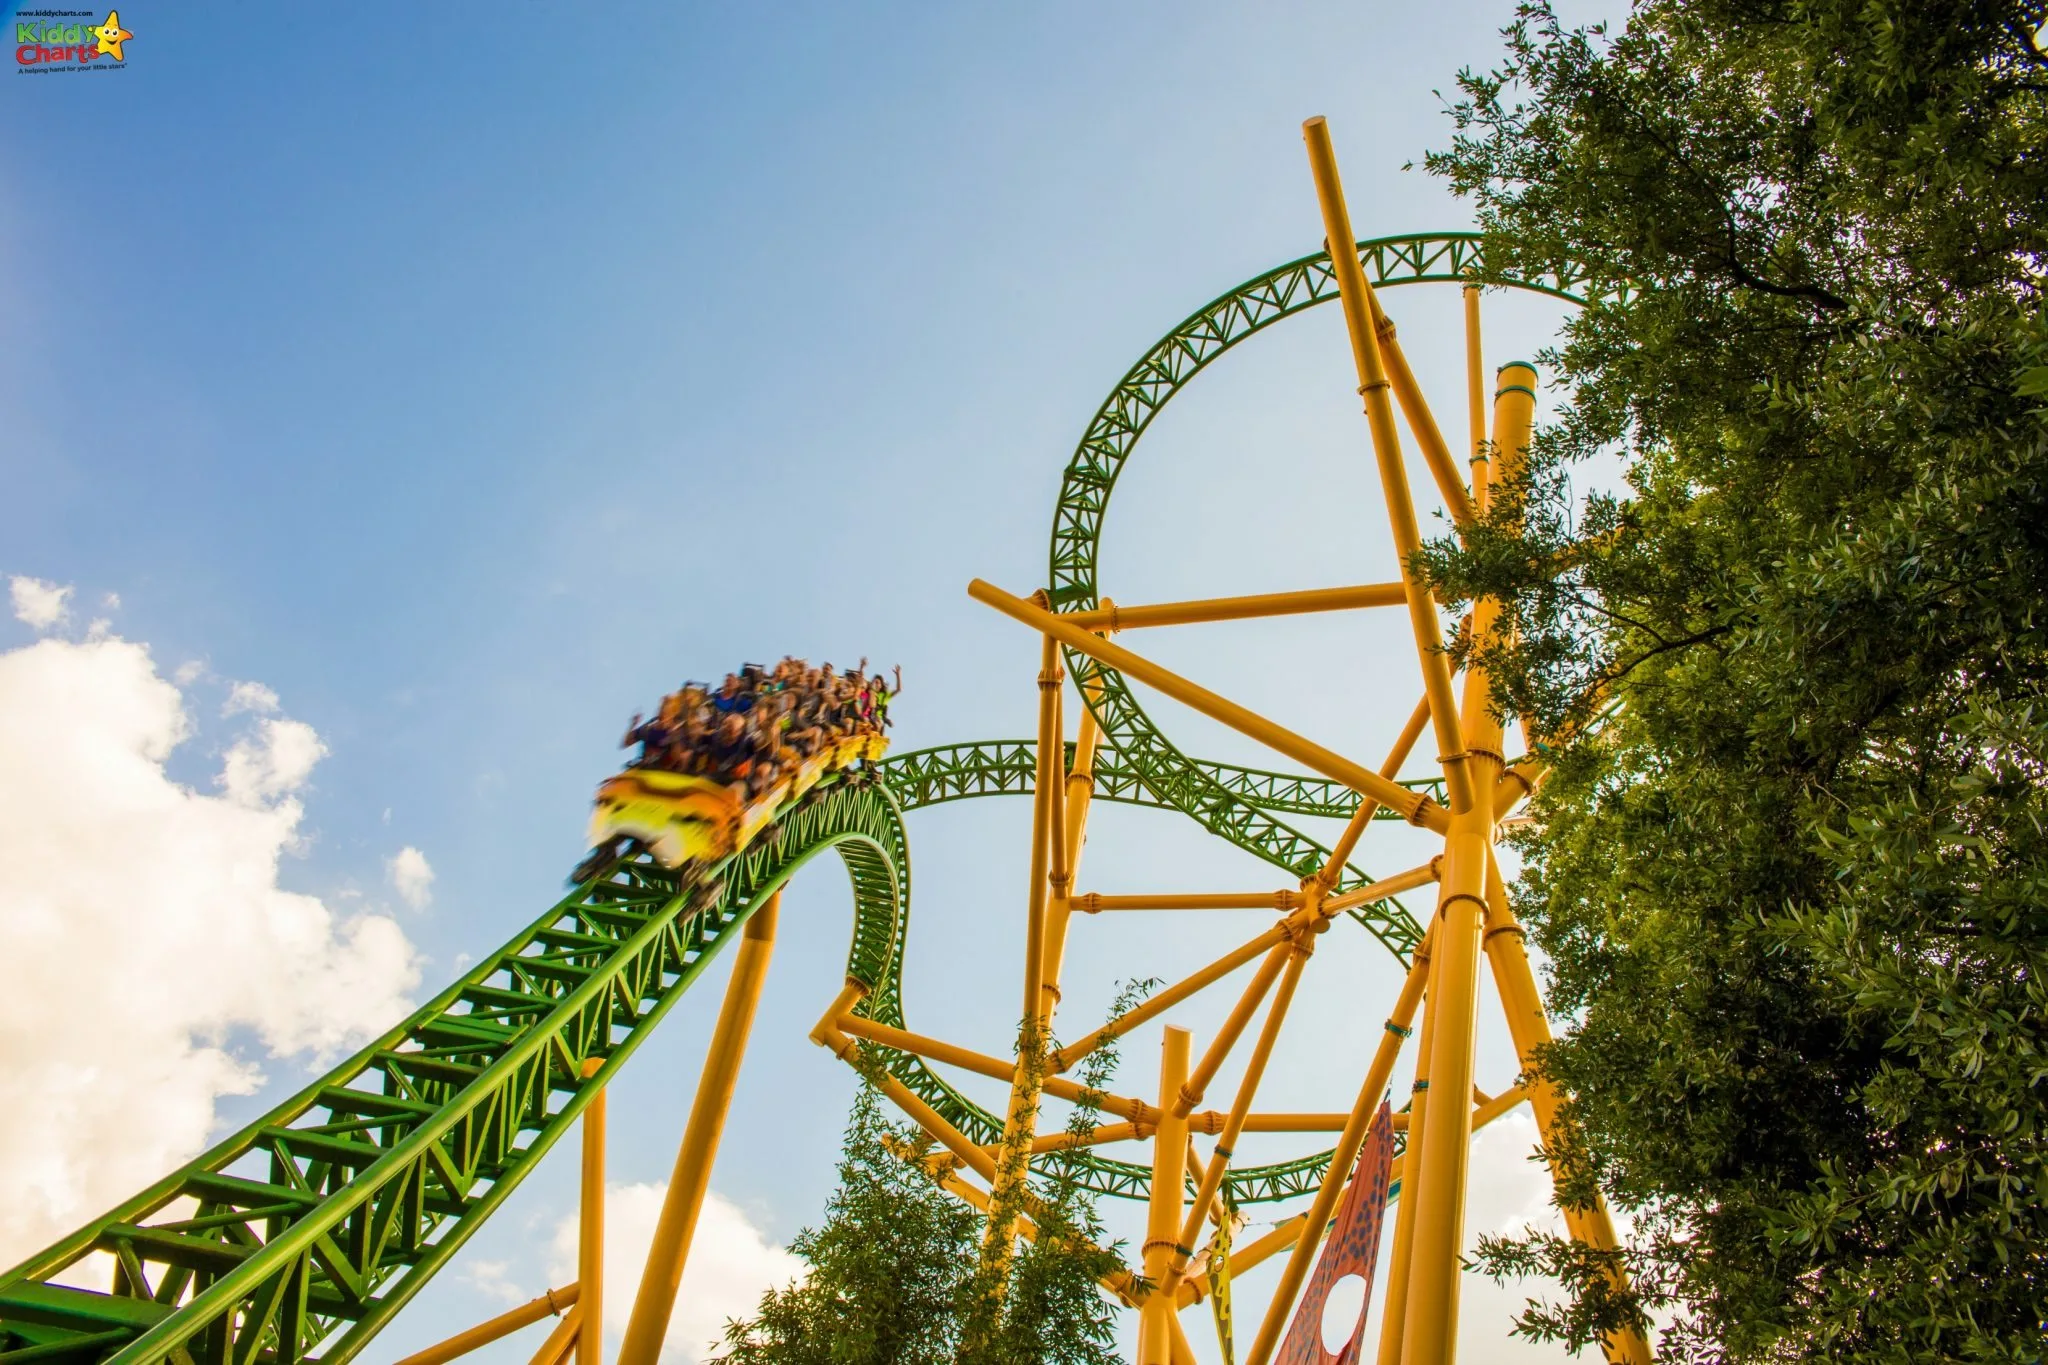 Busche Gardens Tampa's Cheetah Hunt is 3 minutes long - its a long time for you to scream, right!?!? ;-)